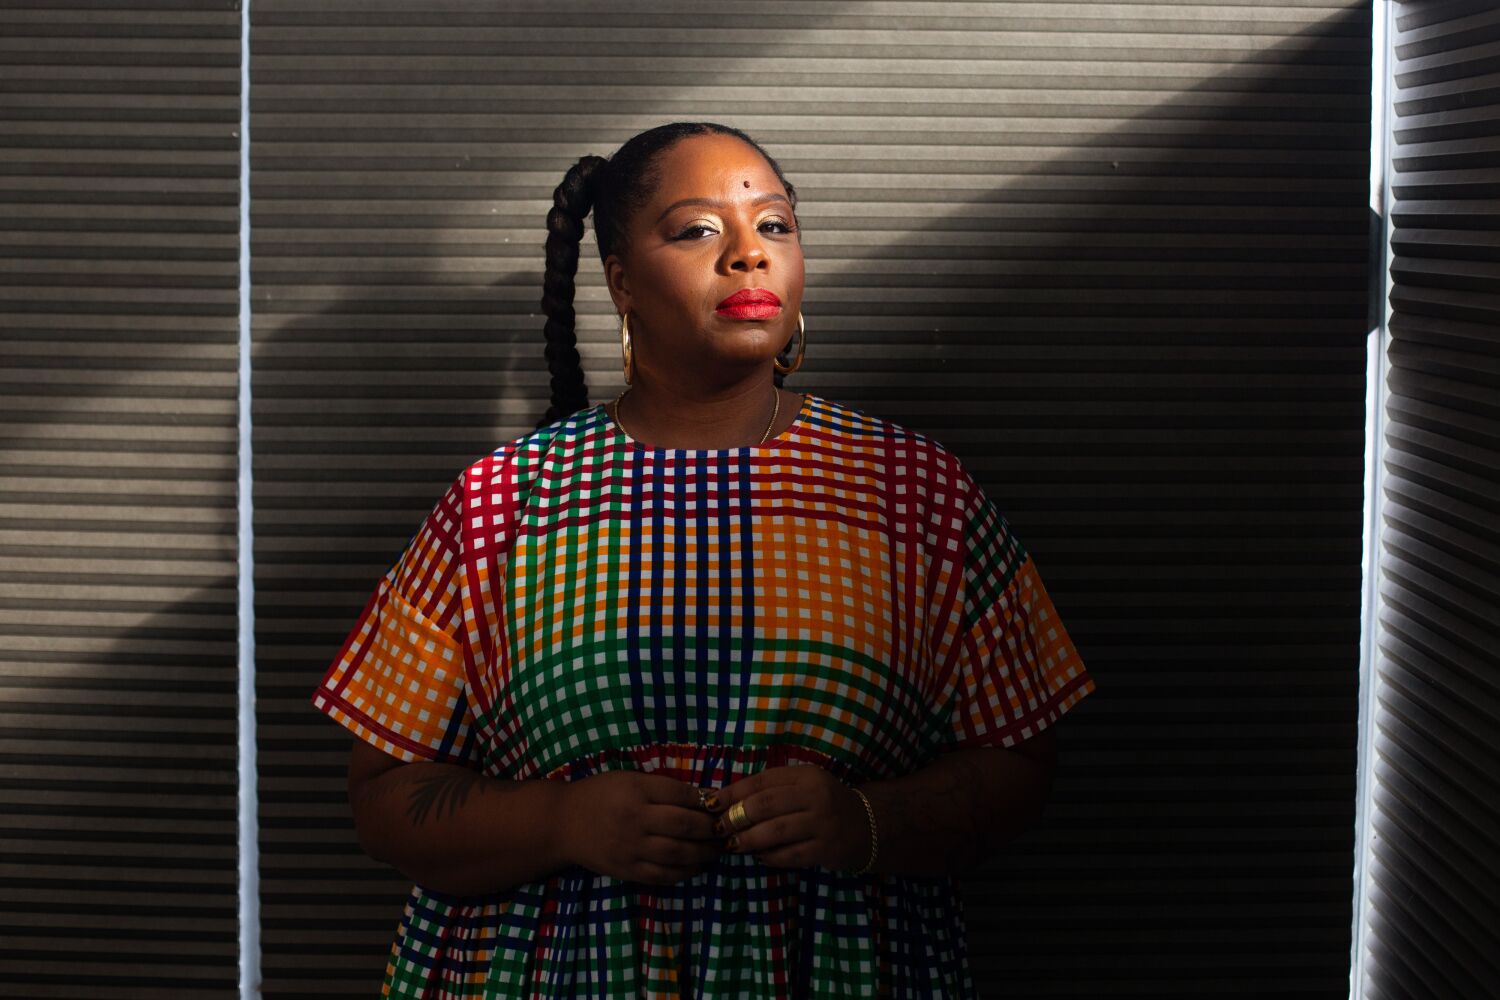 For Patrisse Cullors, co-founder of Black Lives Matter, police violence hits close to home